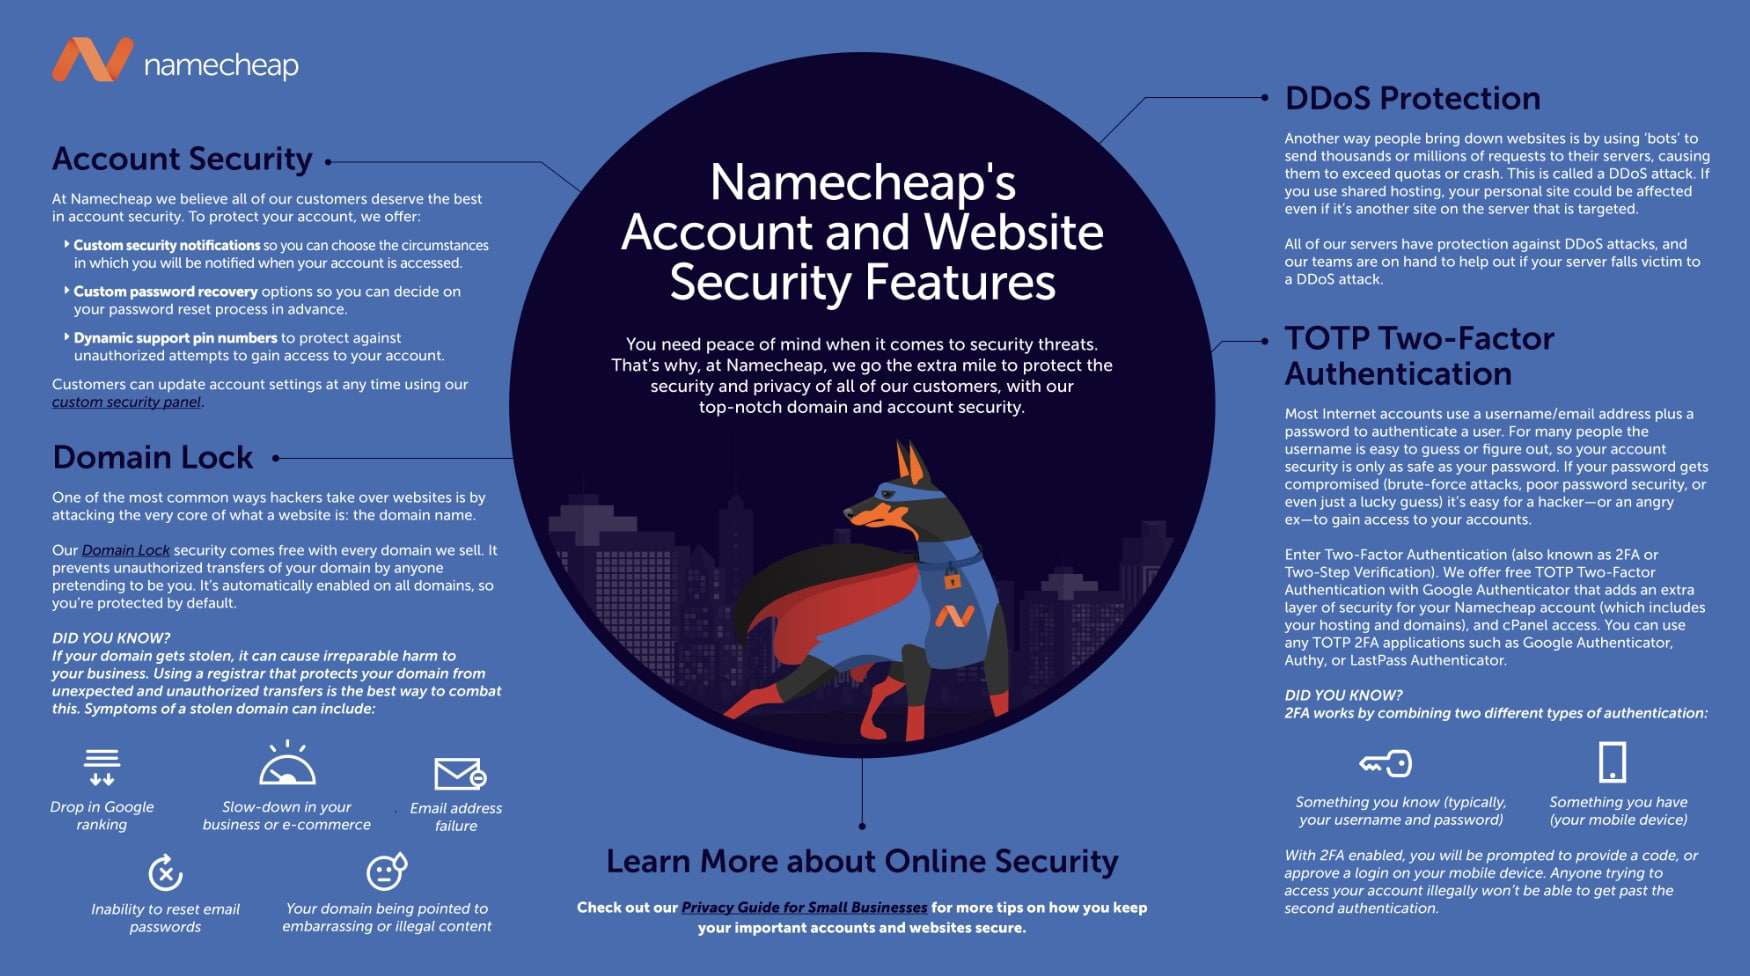 A comprehensive look at Namecheap’s security features